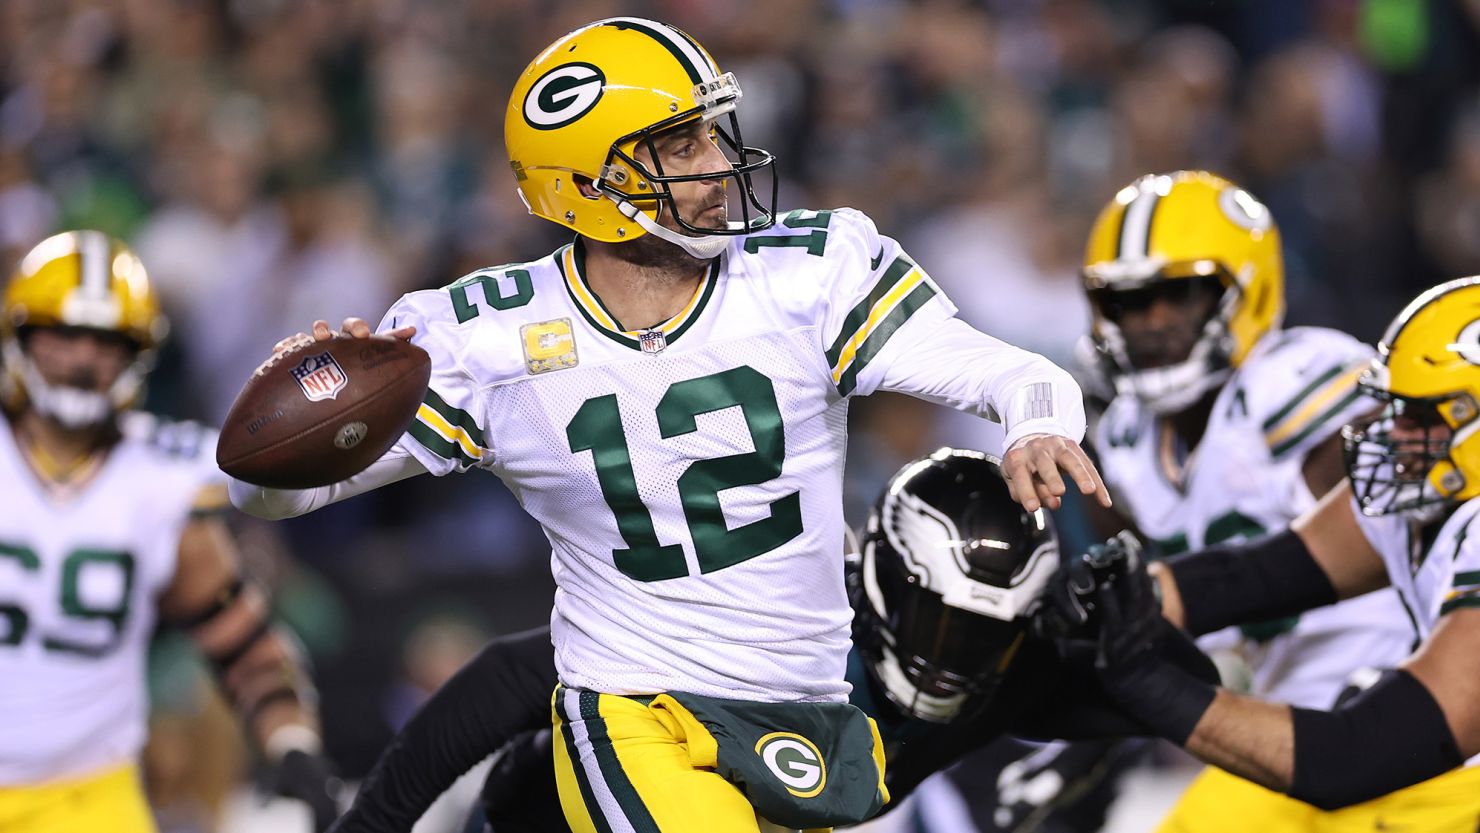 PHILADELPHIA, PENNSYLVANIA - NOVEMBER 27: Aaron Rodgers #12 of the Green Bay Packers throws a pass during the first quarter against the Philadelphia Eagles at Lincoln Financial Field on November 27, 2022 in Philadelphia, Pennsylvania. (Photo by Scott Taetsch/Getty Images)